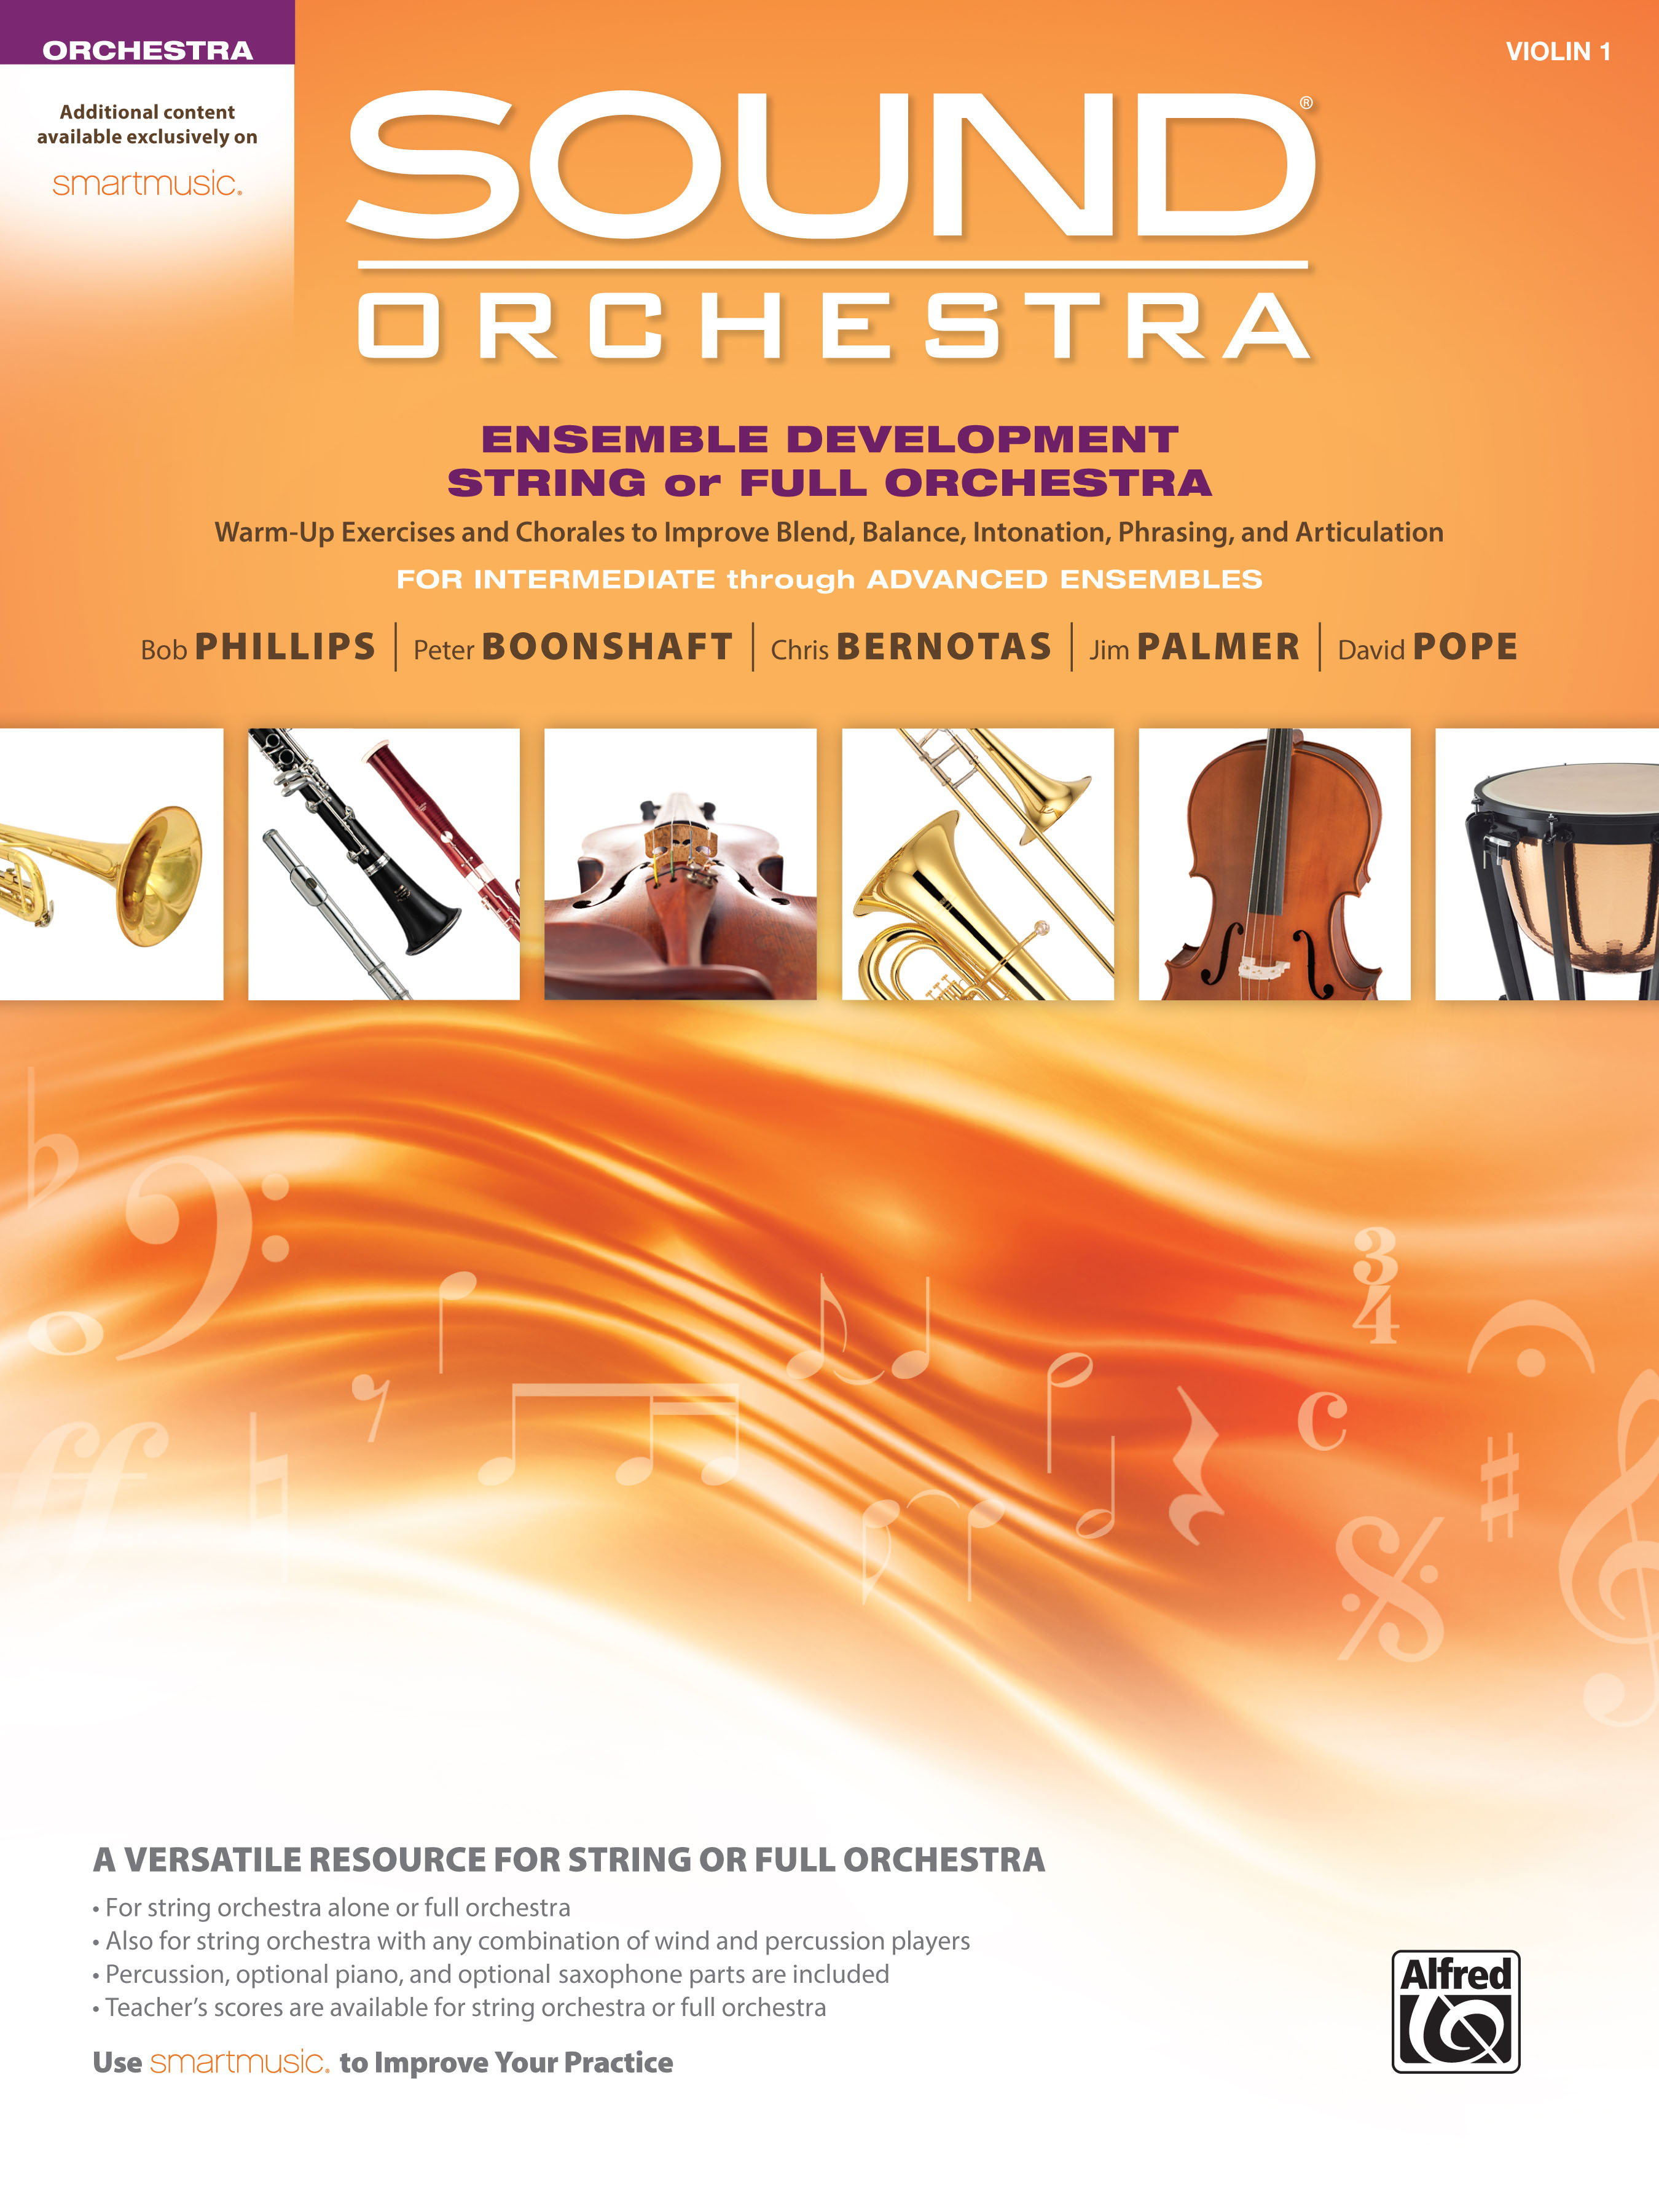 Sound Innovations for String Orchestra Book 1